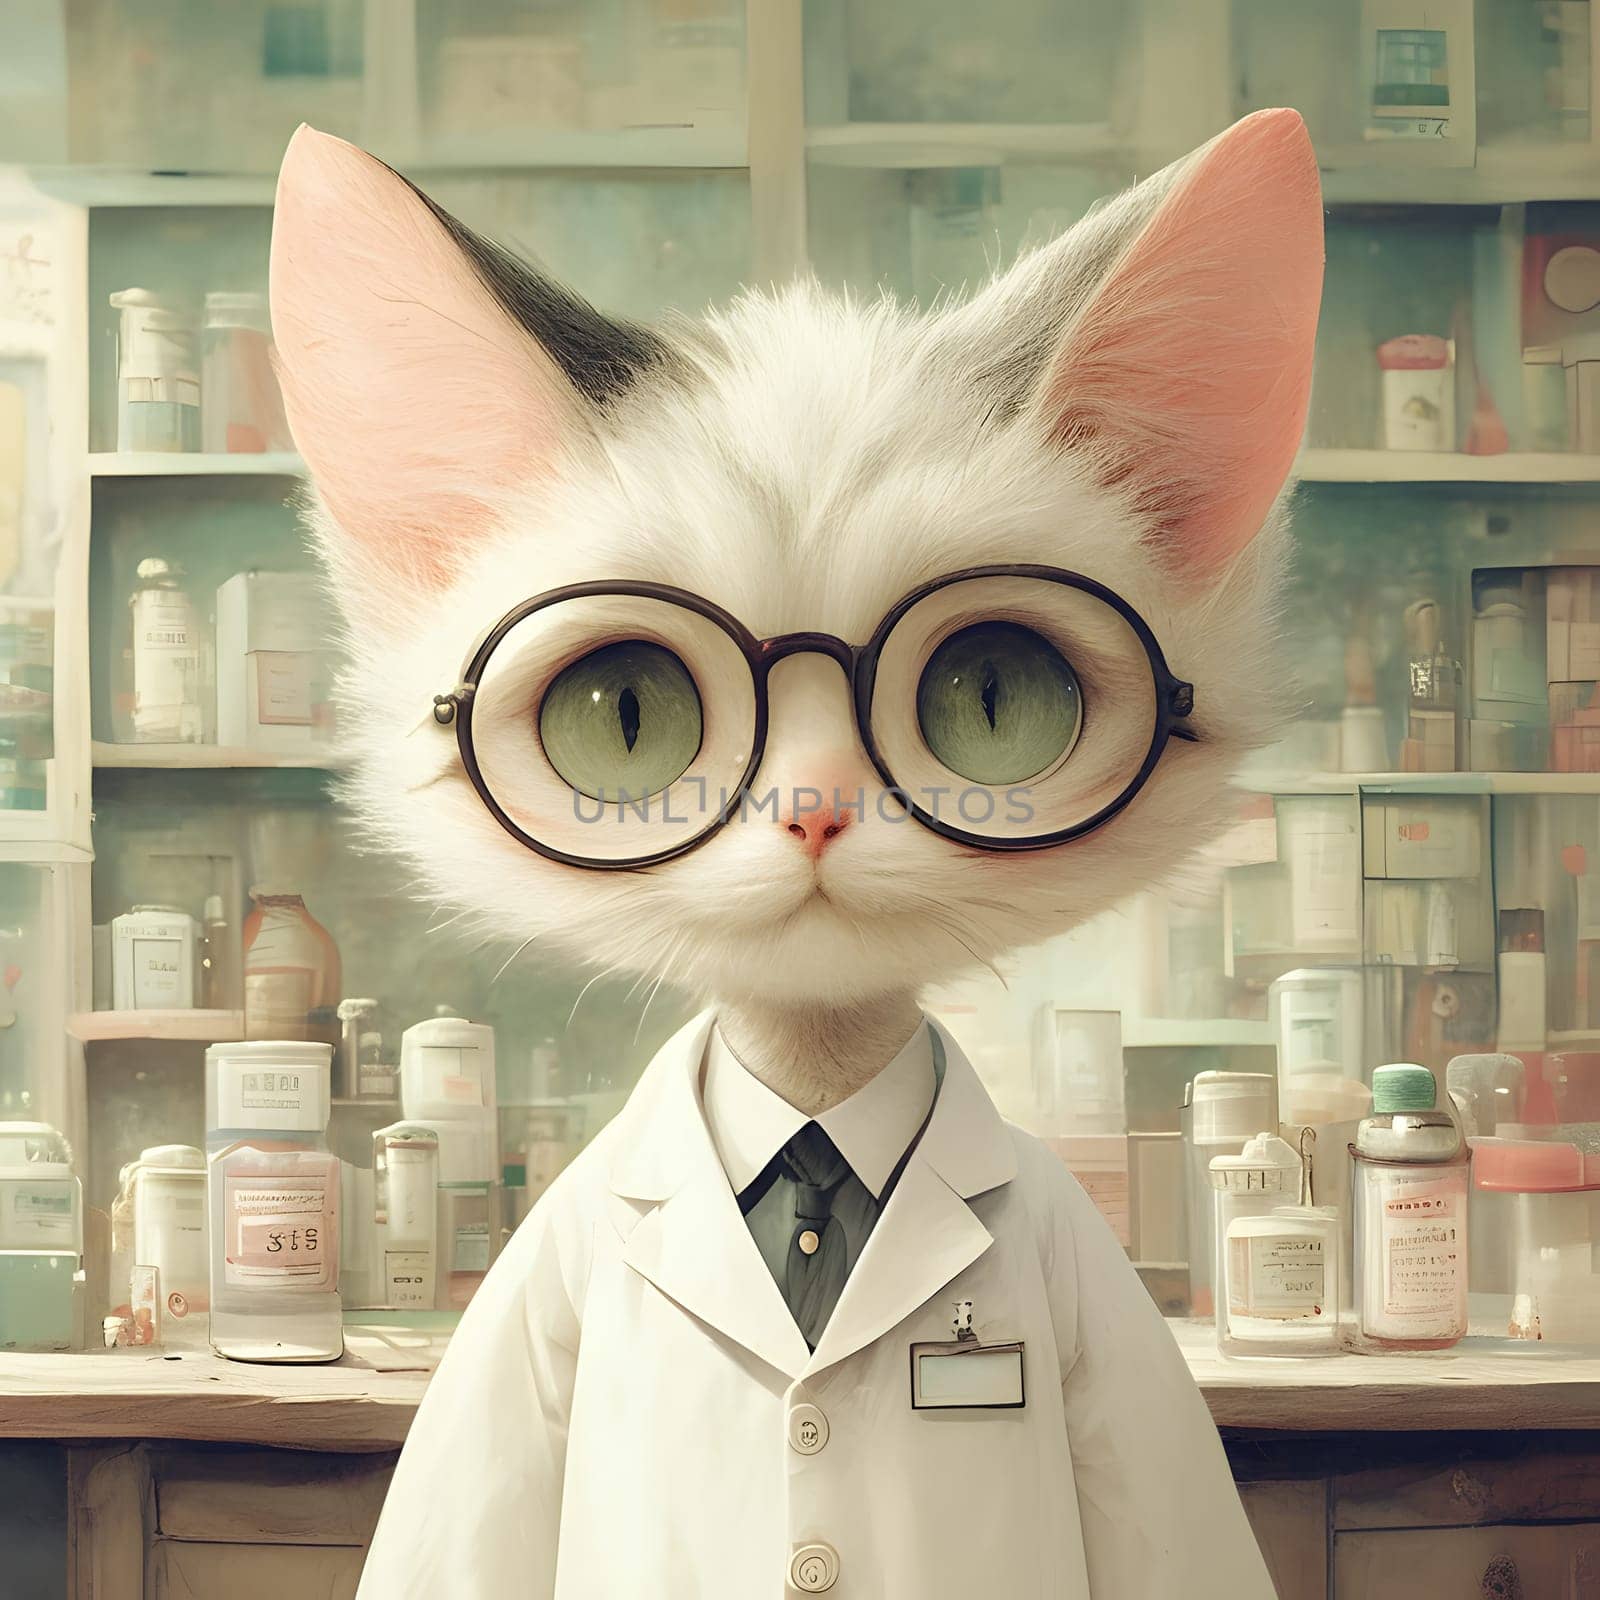 A Felidae, wearing Glasses, and a Lab Coat, stands next to a Shelf filled with Vision care books. The Cat has Whiskers and looks scholarly